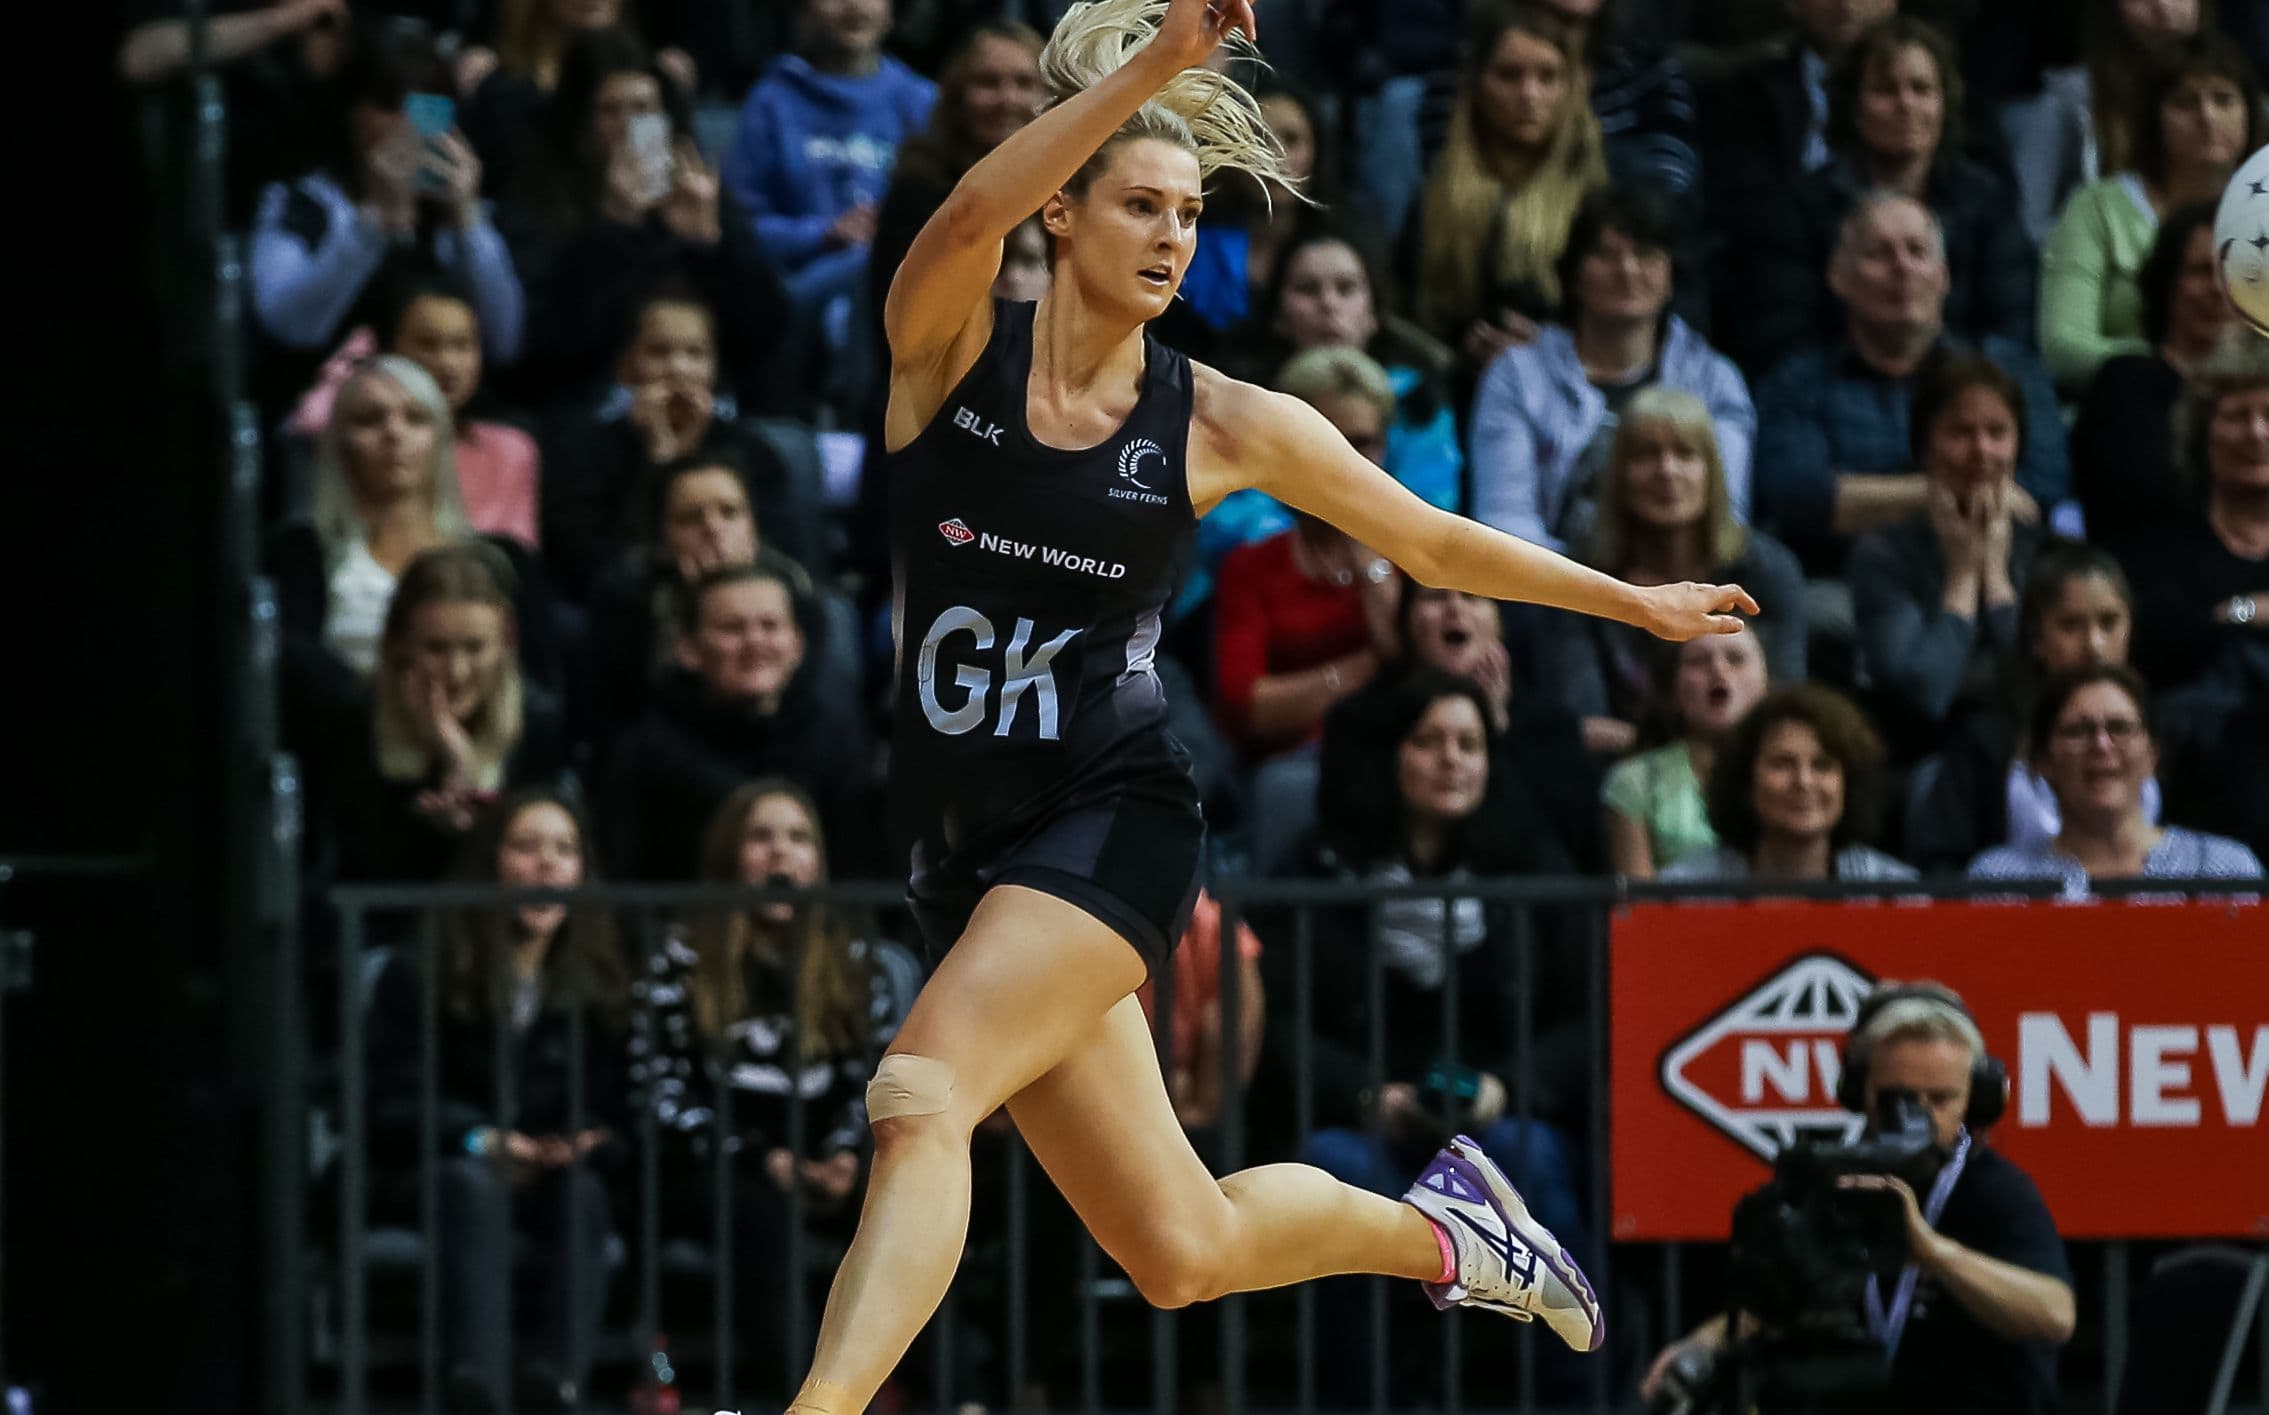 New Zealand's Jane Watson in action during the Netball Quad Series netball match netball match - Silver Ferns v South Africa played at Claudelands Arena, Hamilton, New Zealand on Wednesday 31 August 2016.